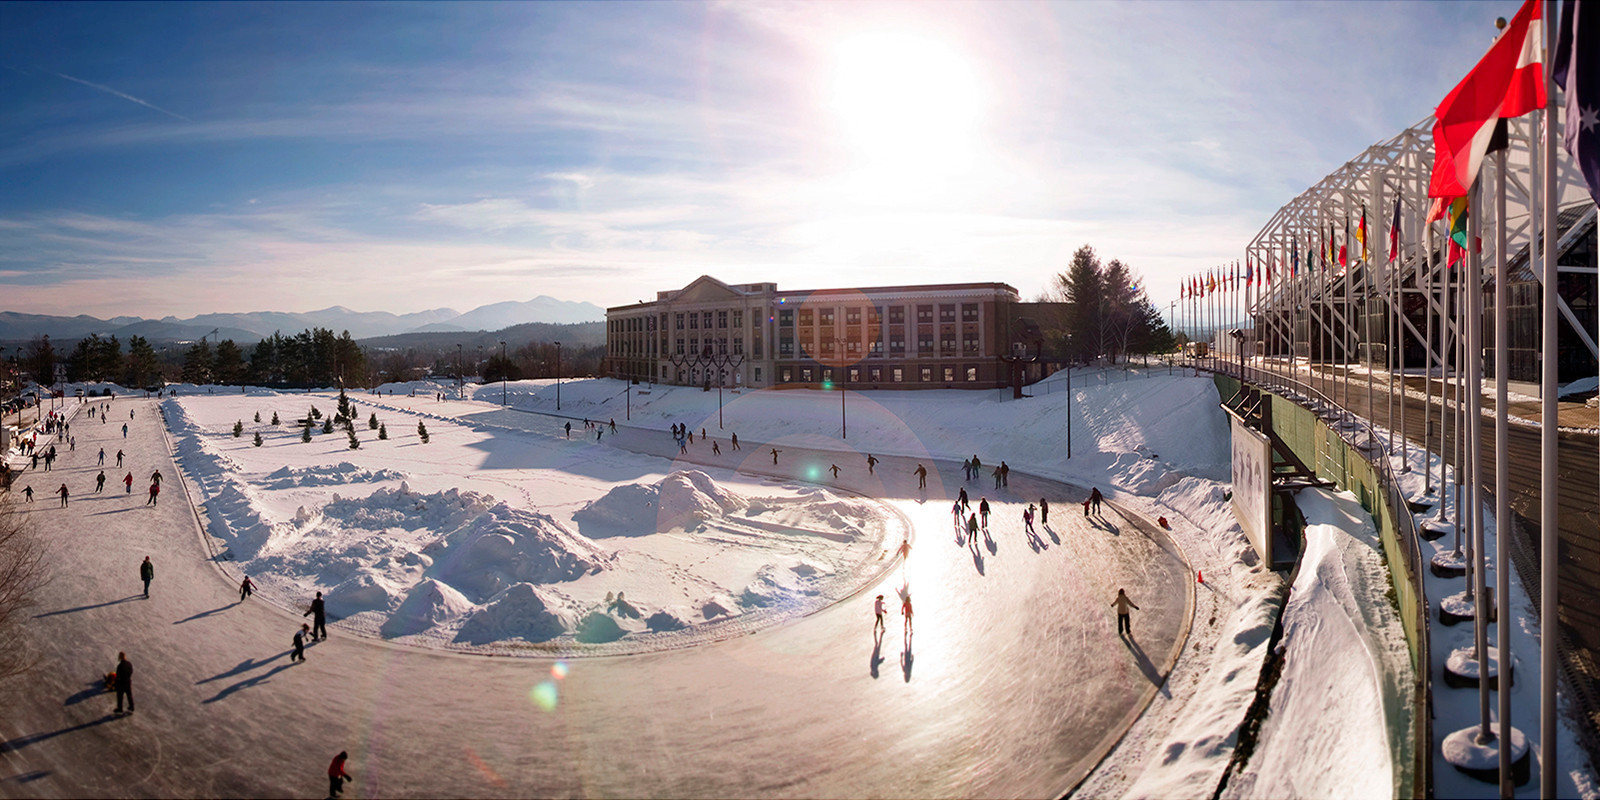 Lake Placid 2023 FISU World University Games is set to be held from January 12 to 22 ©Lake Placid 2023